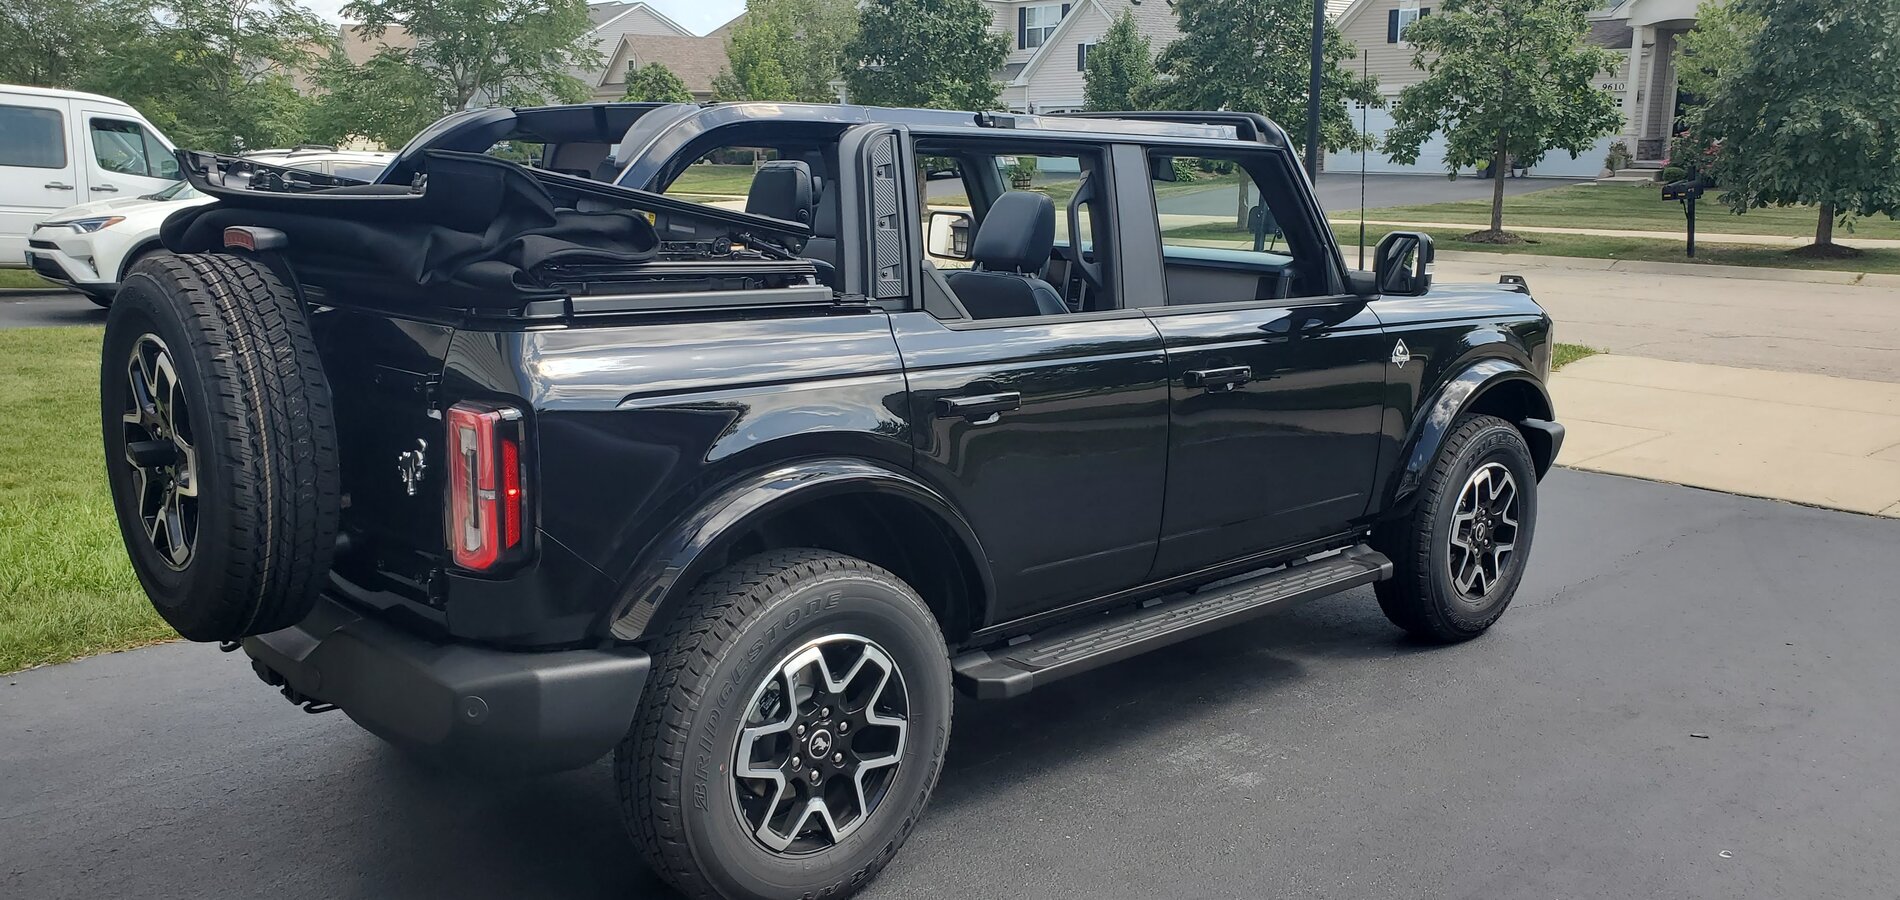 Ford Bronco New to SUVs, picked up a Outer Banks yesterday - Newbie needs some help 20210824_142956